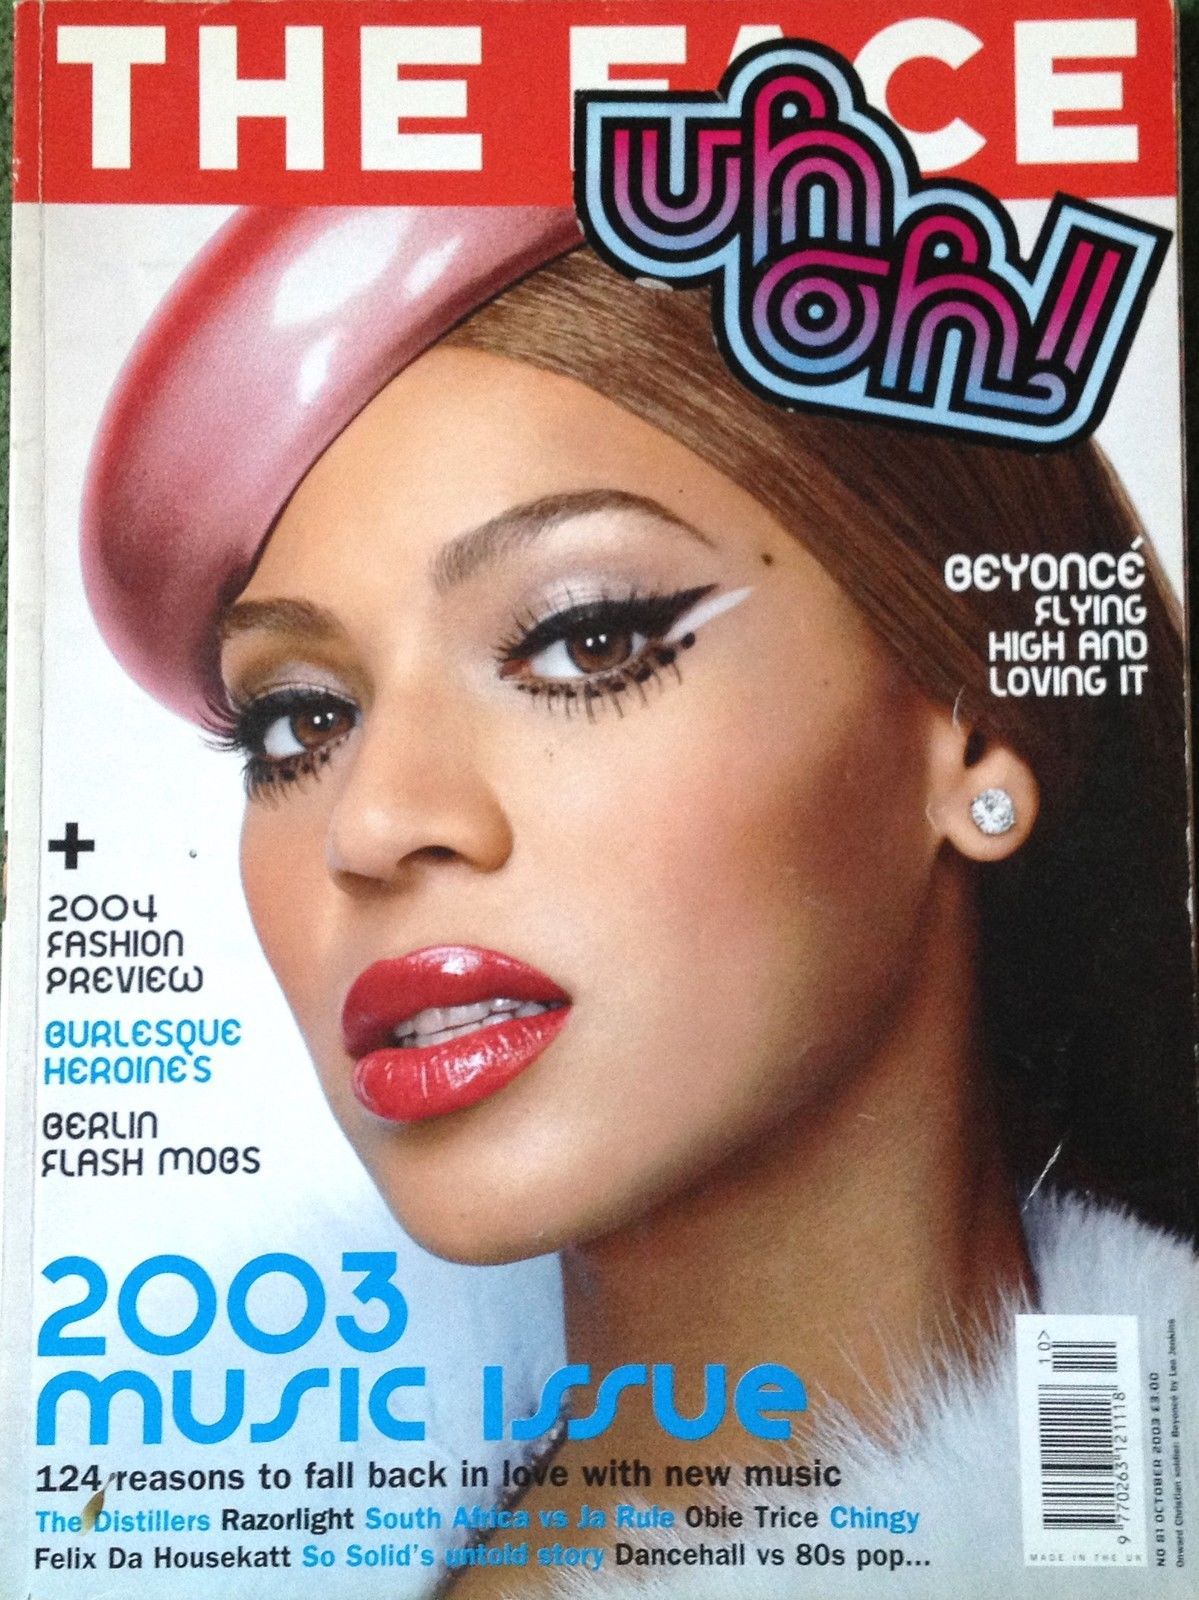 THE FACE, THE ICONIC STYLE MAGAZINE THAT DEFINED YOUTH CULTURE, IS ...